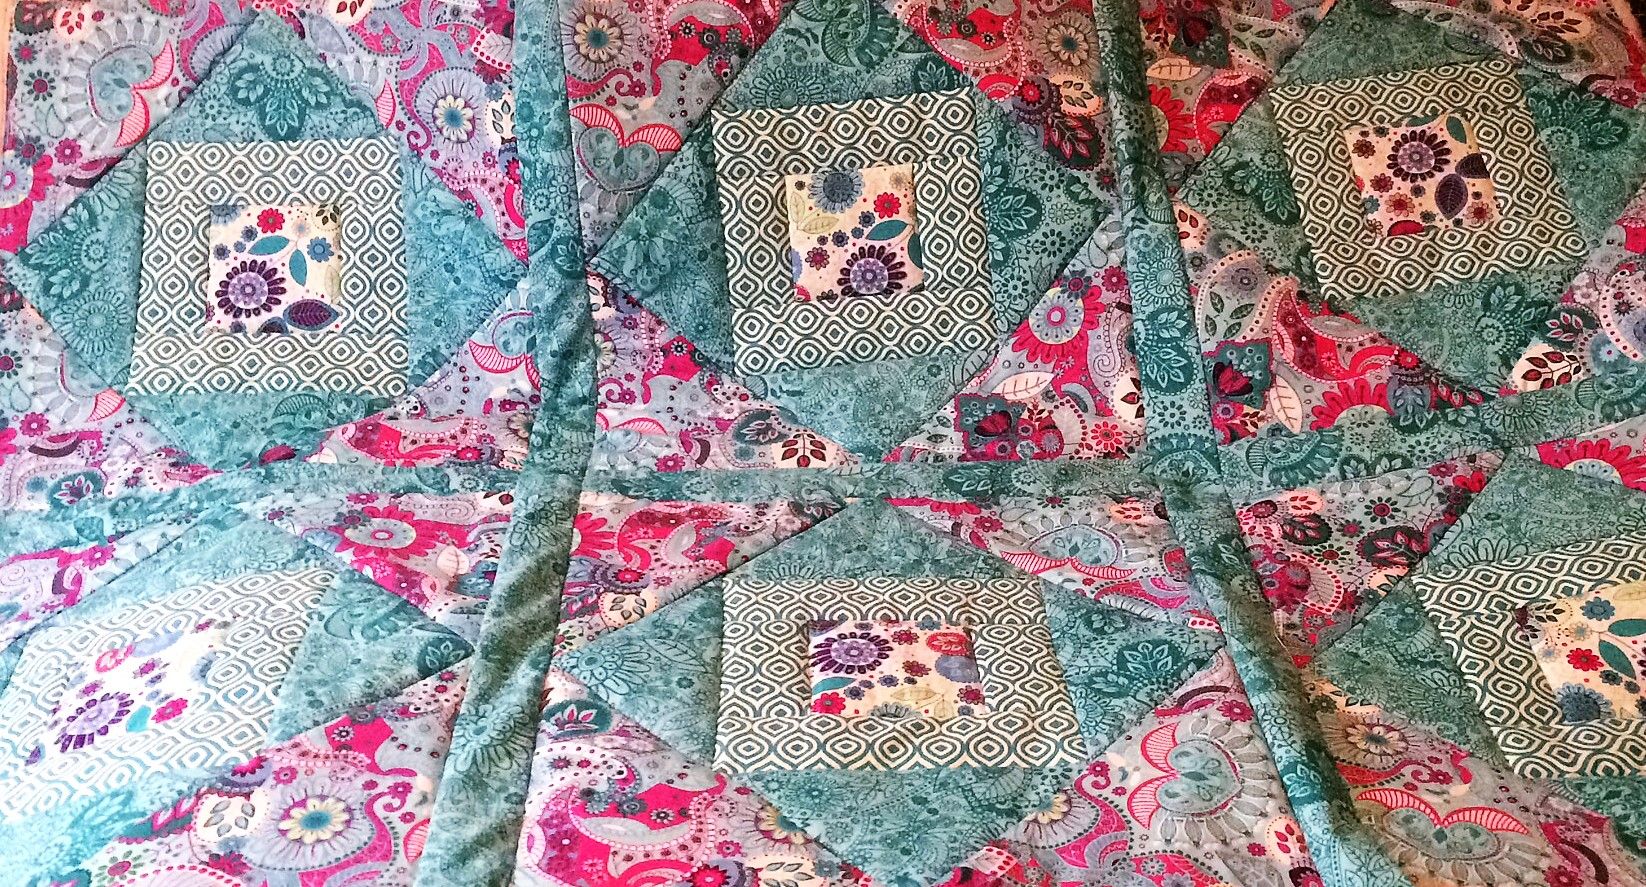 Debby's Patch wendy's quilt